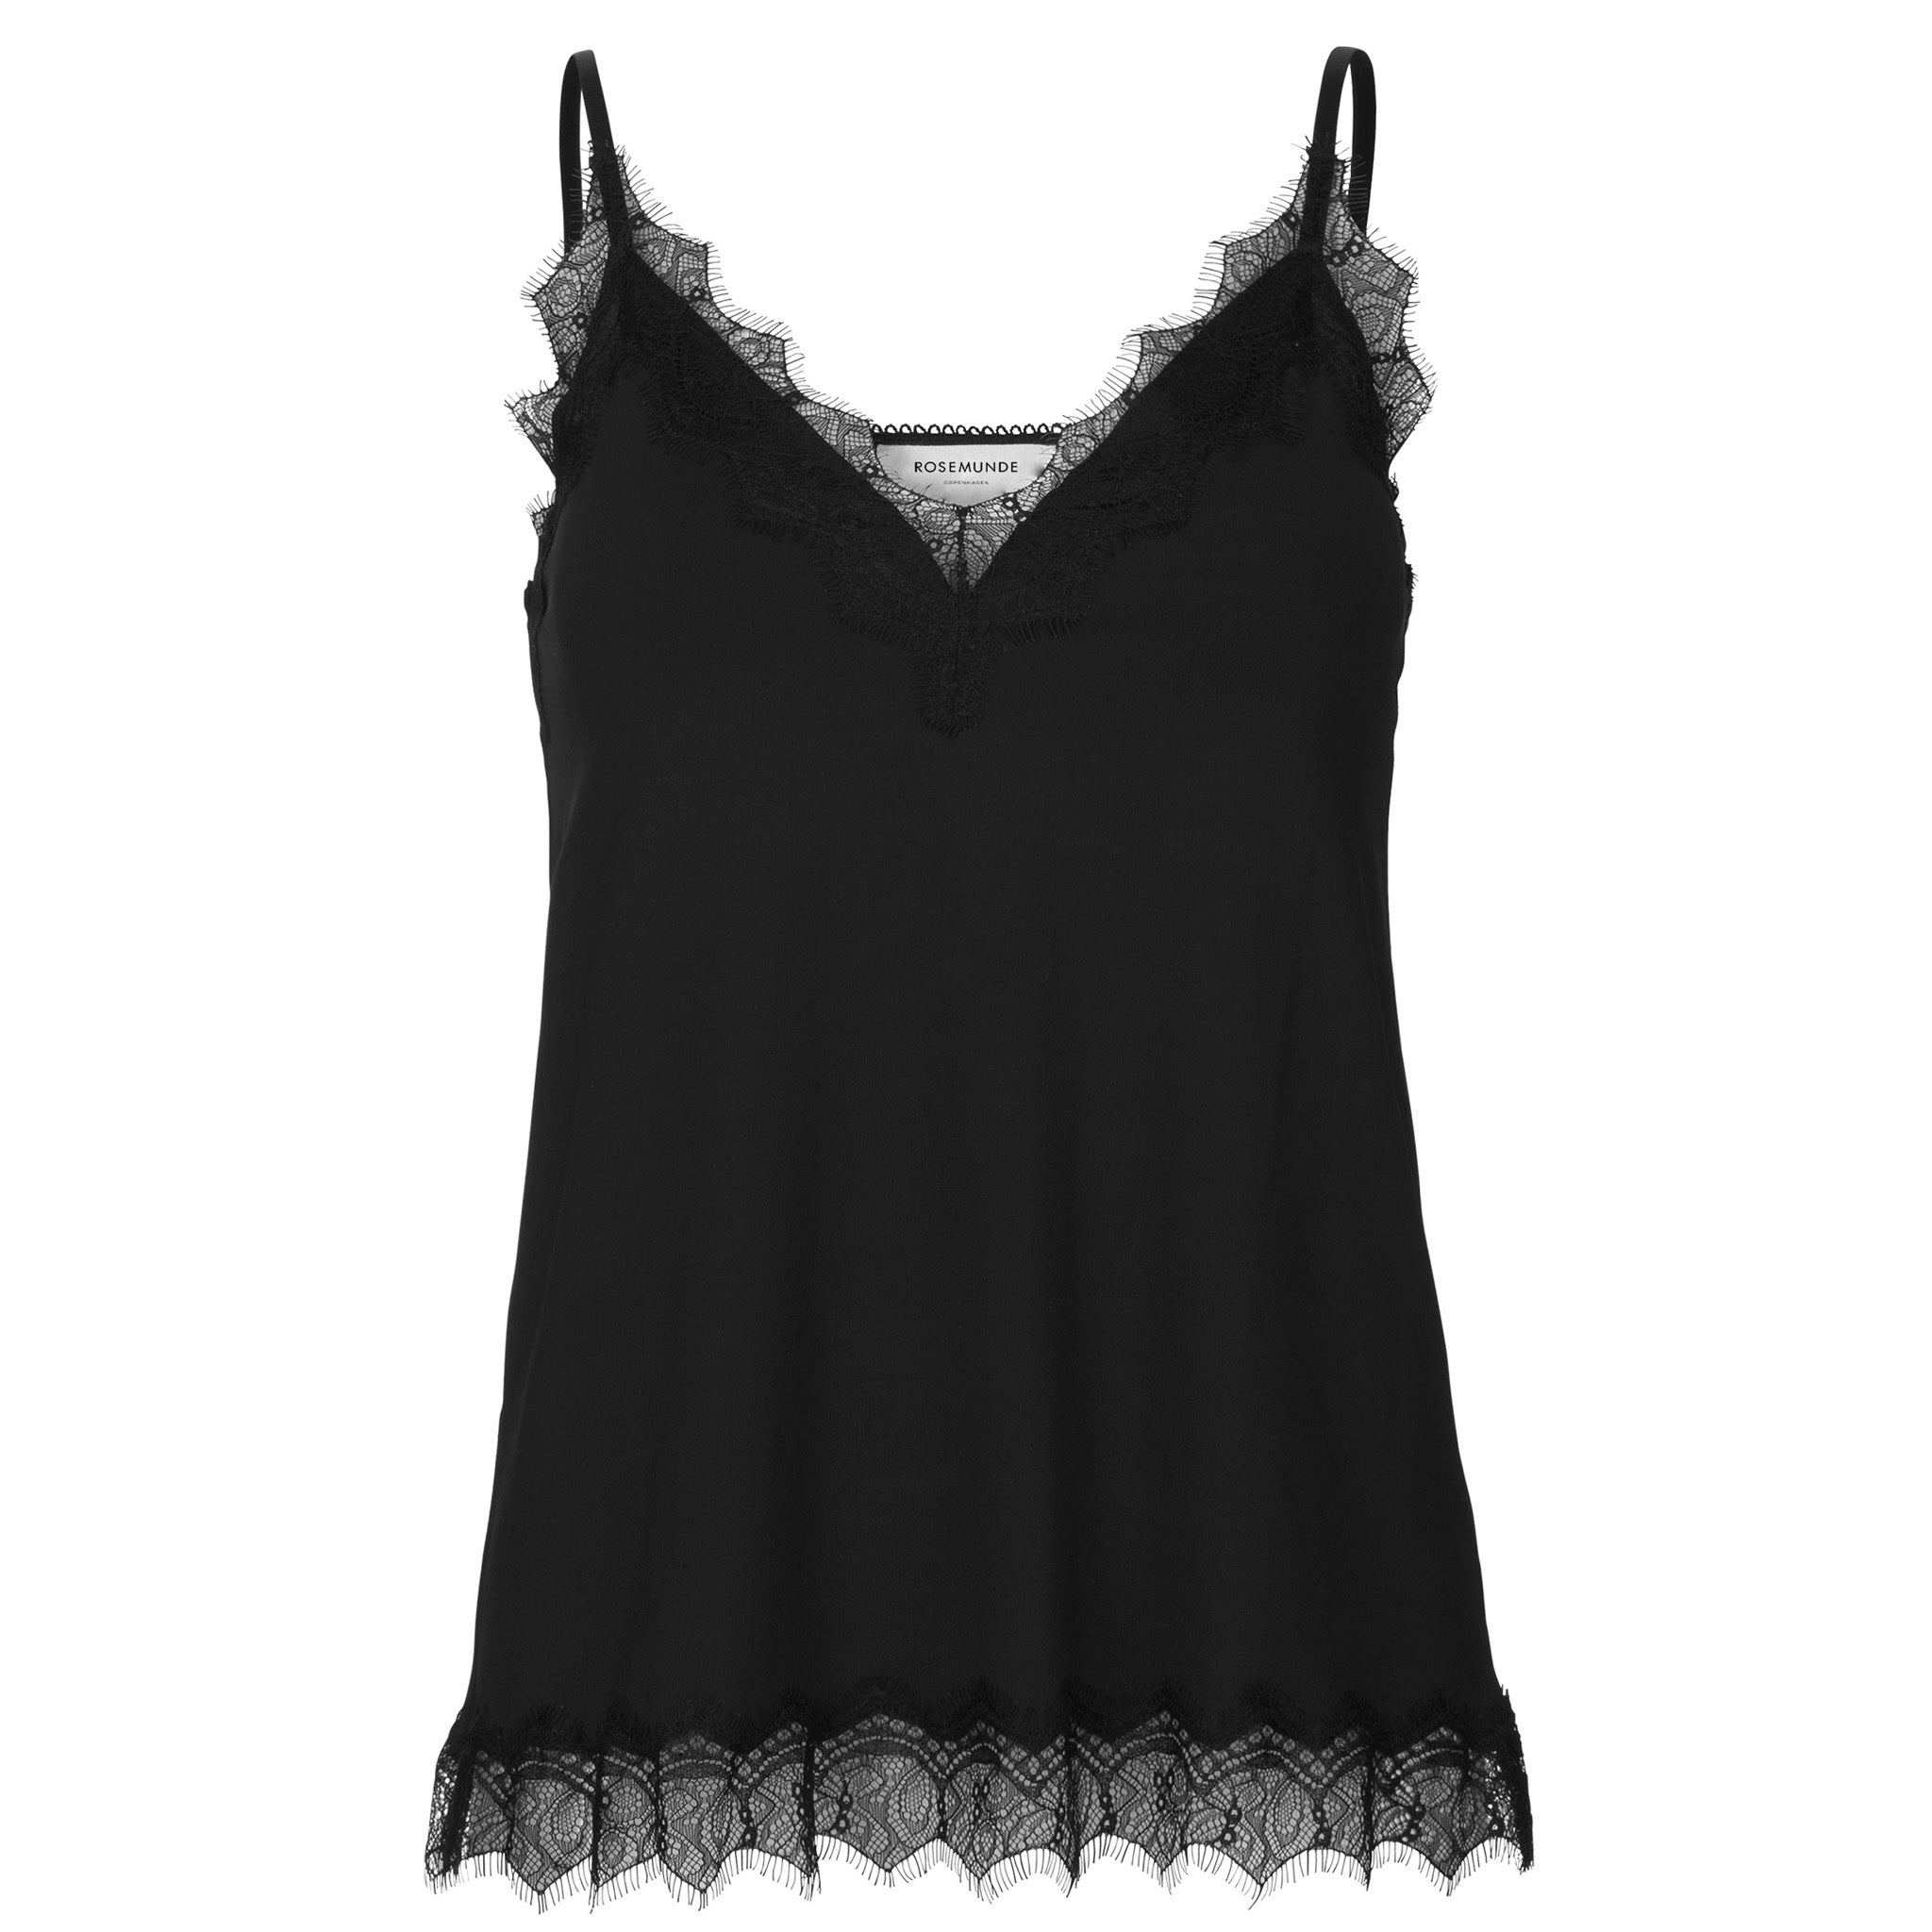 A lightweight Rosemunde black cami top with lace detailing.